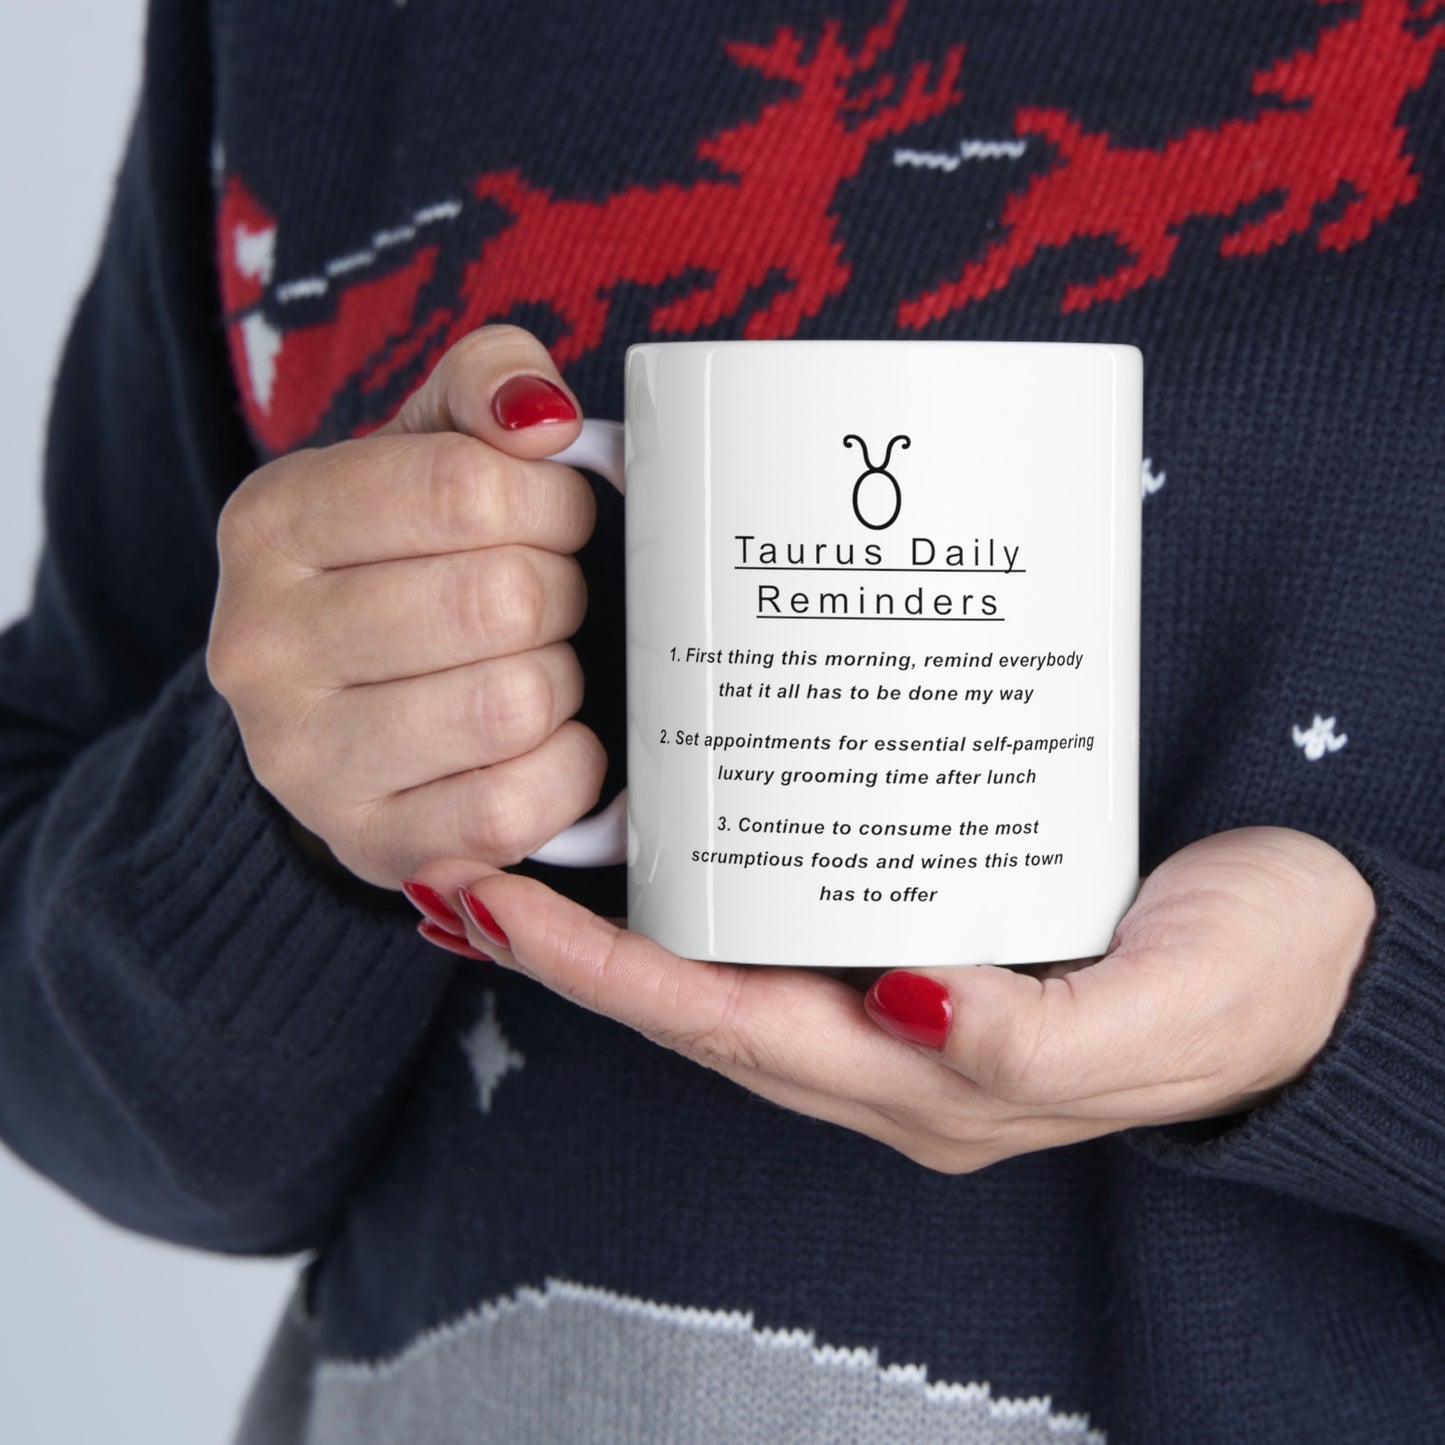 Taurus mug: "A Taurus Daily Reminders" - full text in the description